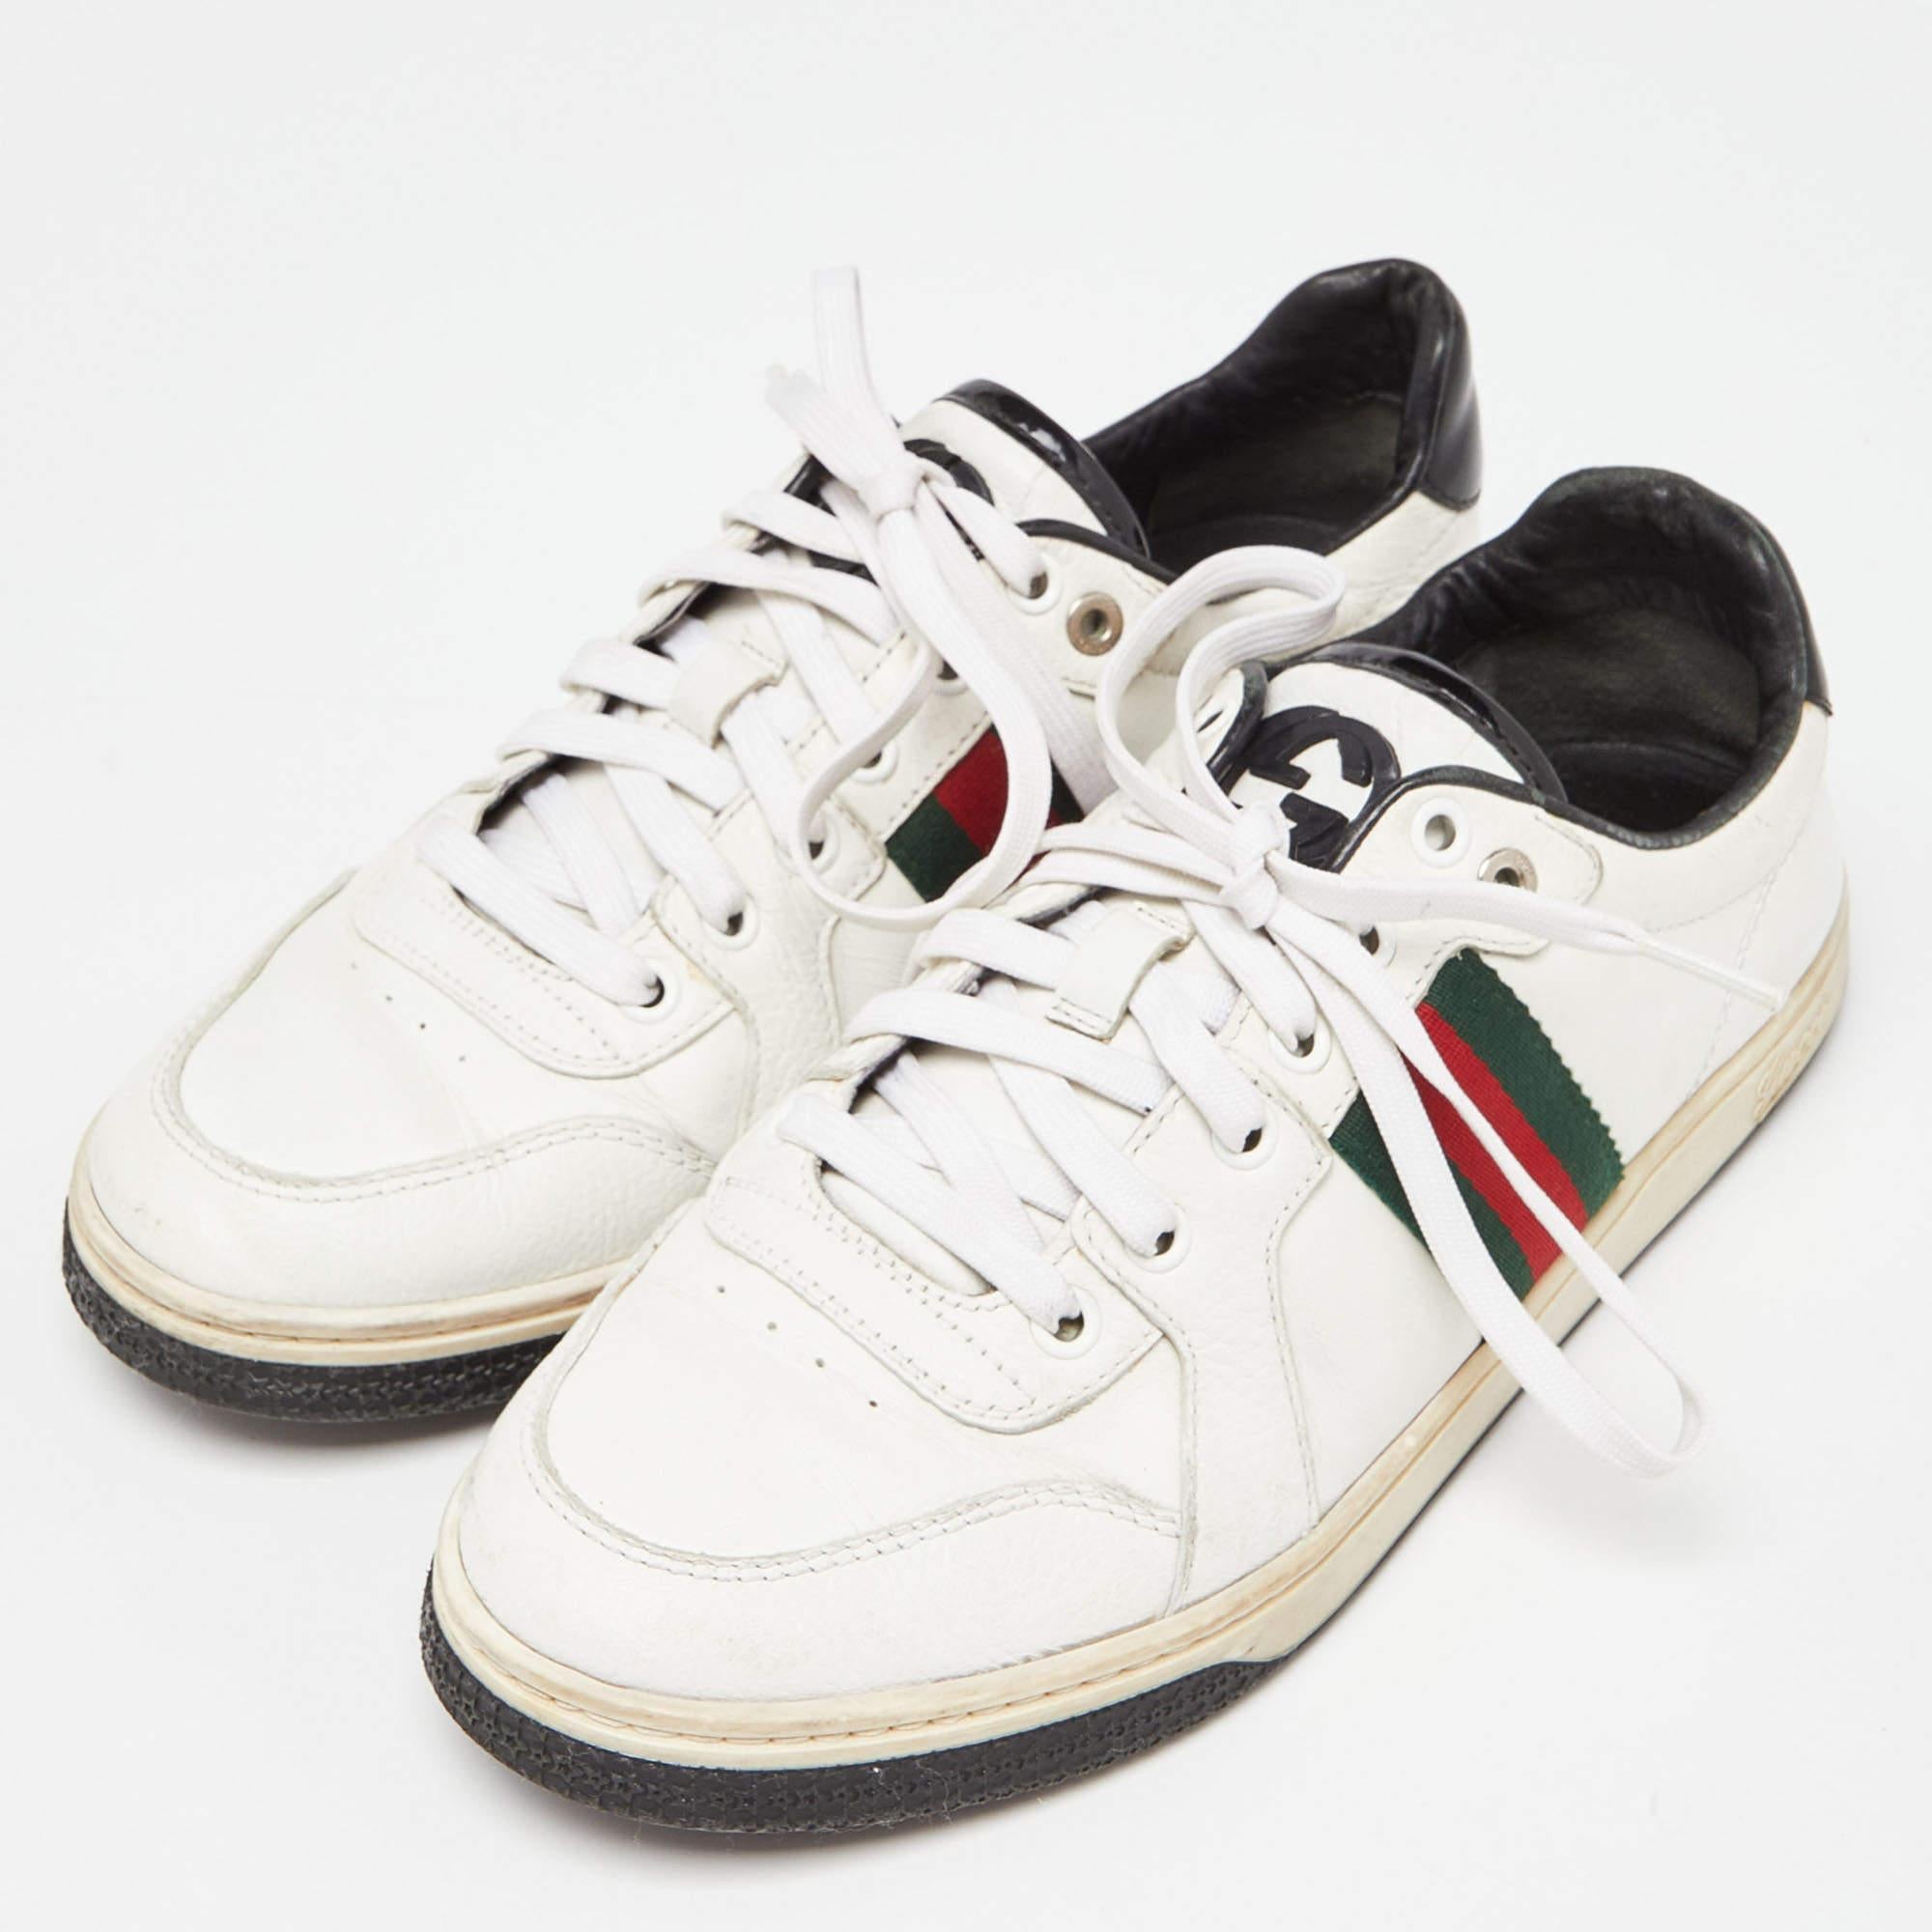 Upgrade your style with these Gucci women's sneakers. Meticulously designed for fashion and comfort, they're the ideal choice for a trendy and comfortable stride.

